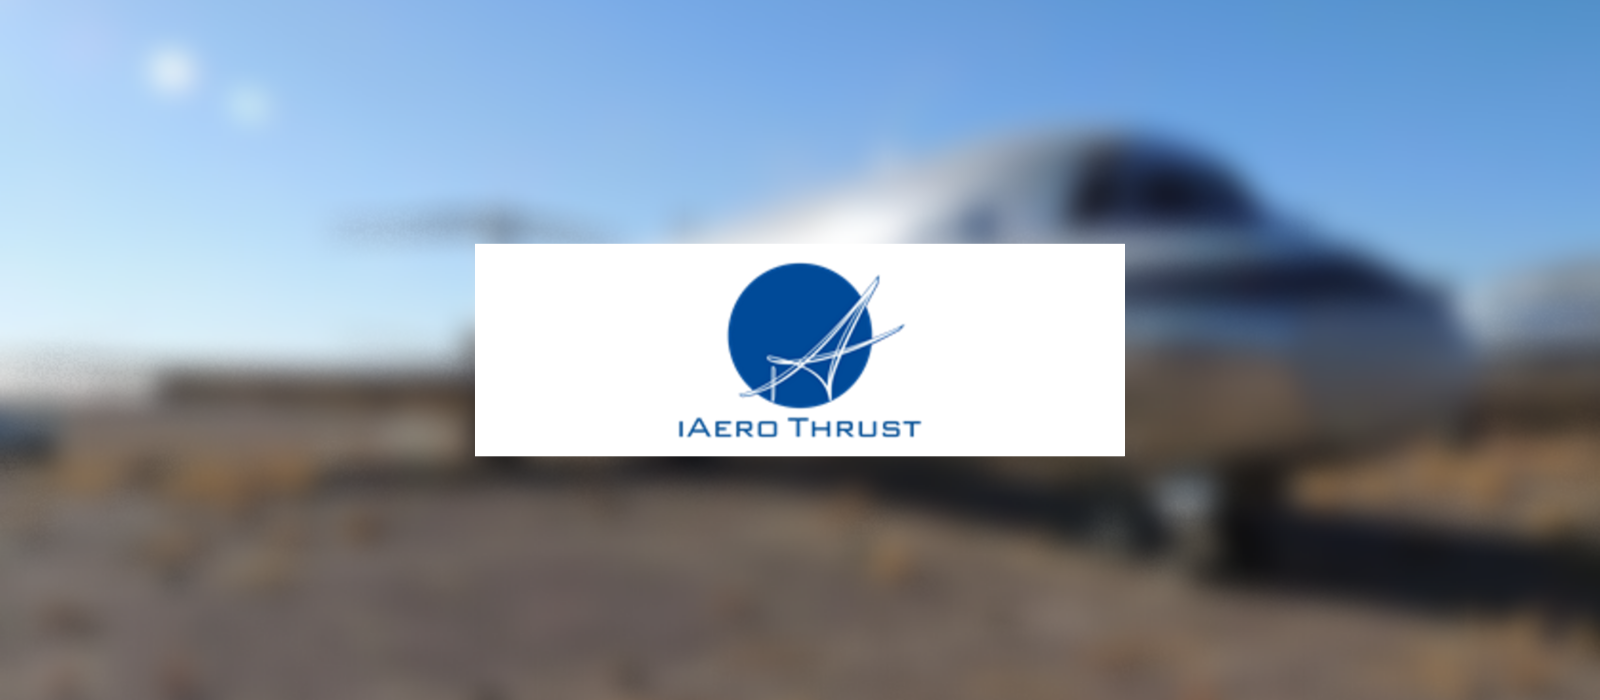 HGP to Partner with Cloud Investment Partners to Conduct Auction of MD-80 Assets from iAero Thrust